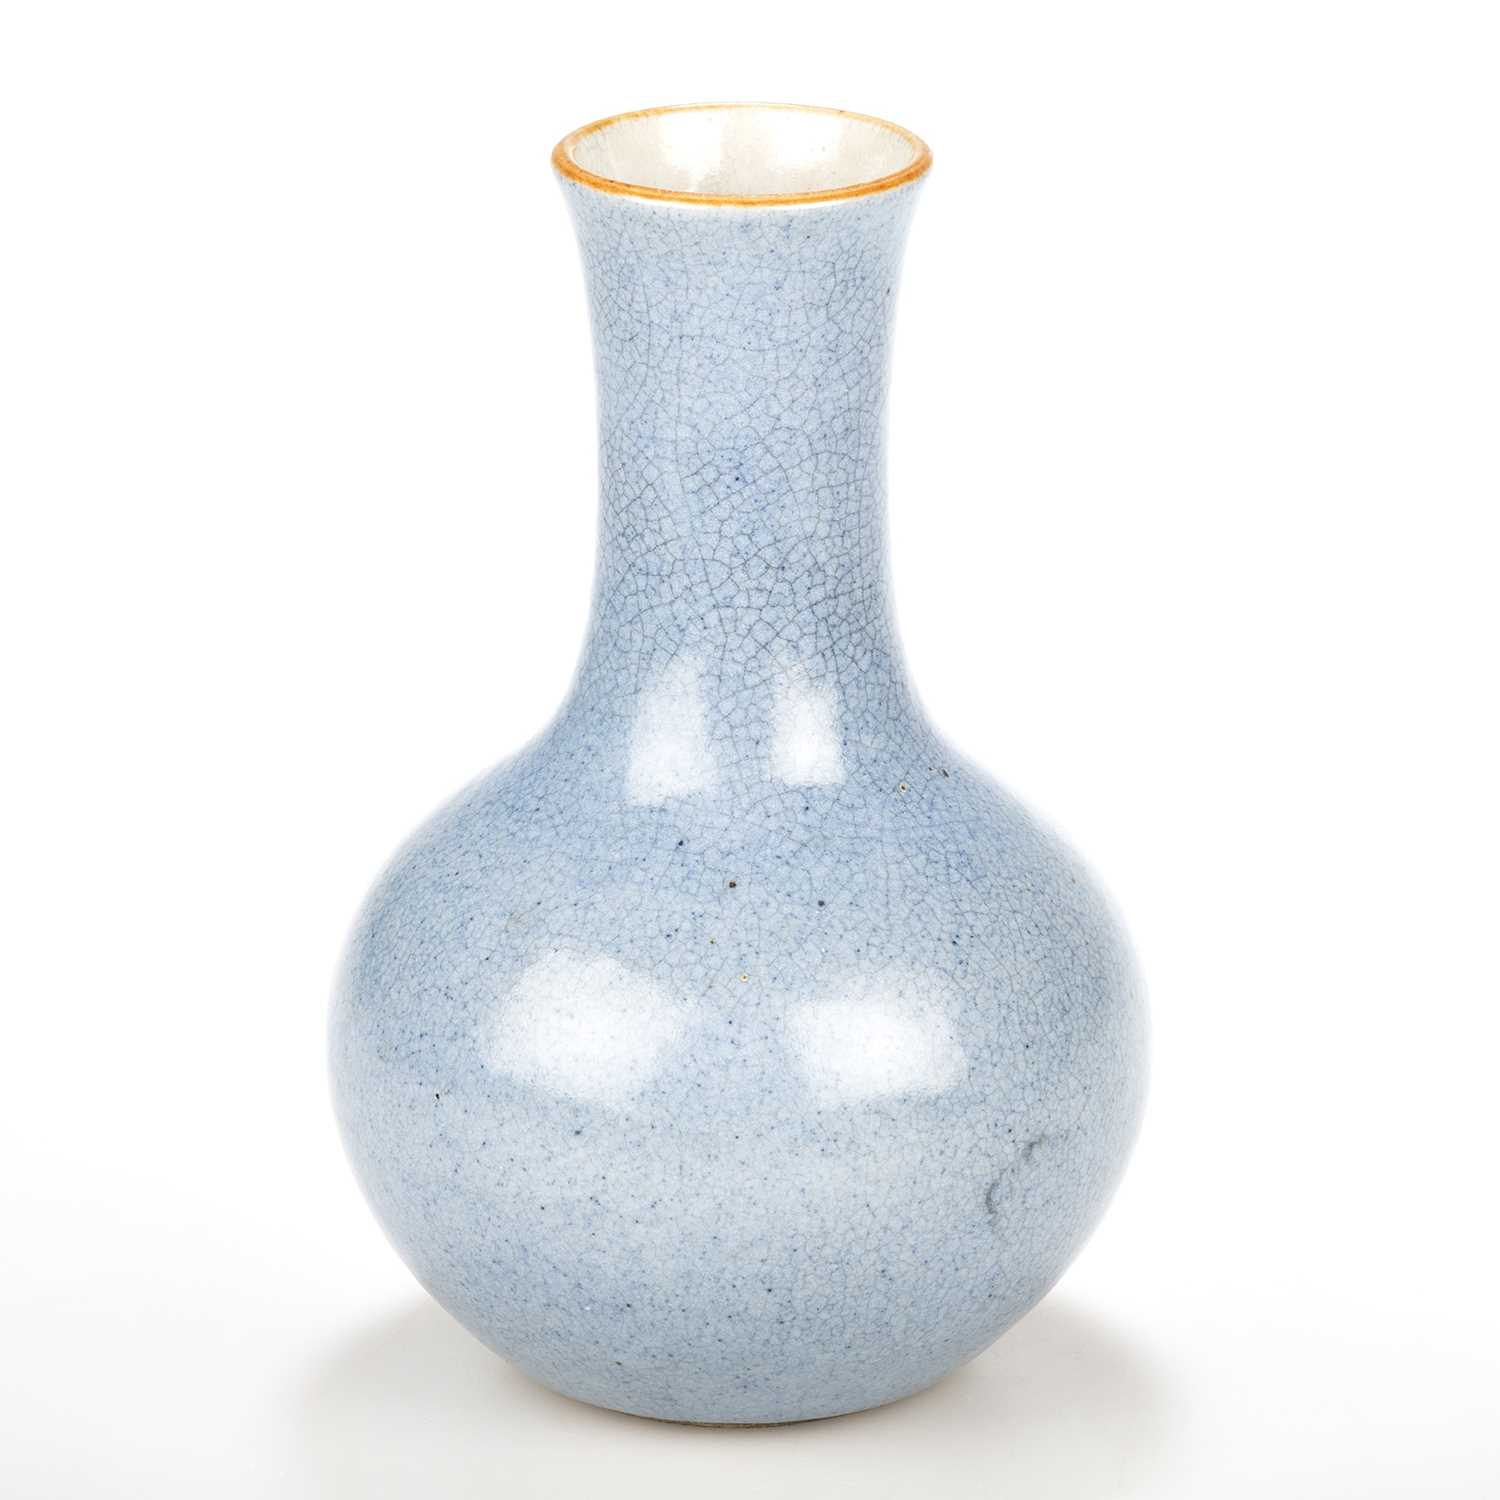 A CHINESE PALE BLUE CRACKLE GLAZE VASE, QING DYNASTY, 18TH/19TH CENTURY - Image 2 of 3